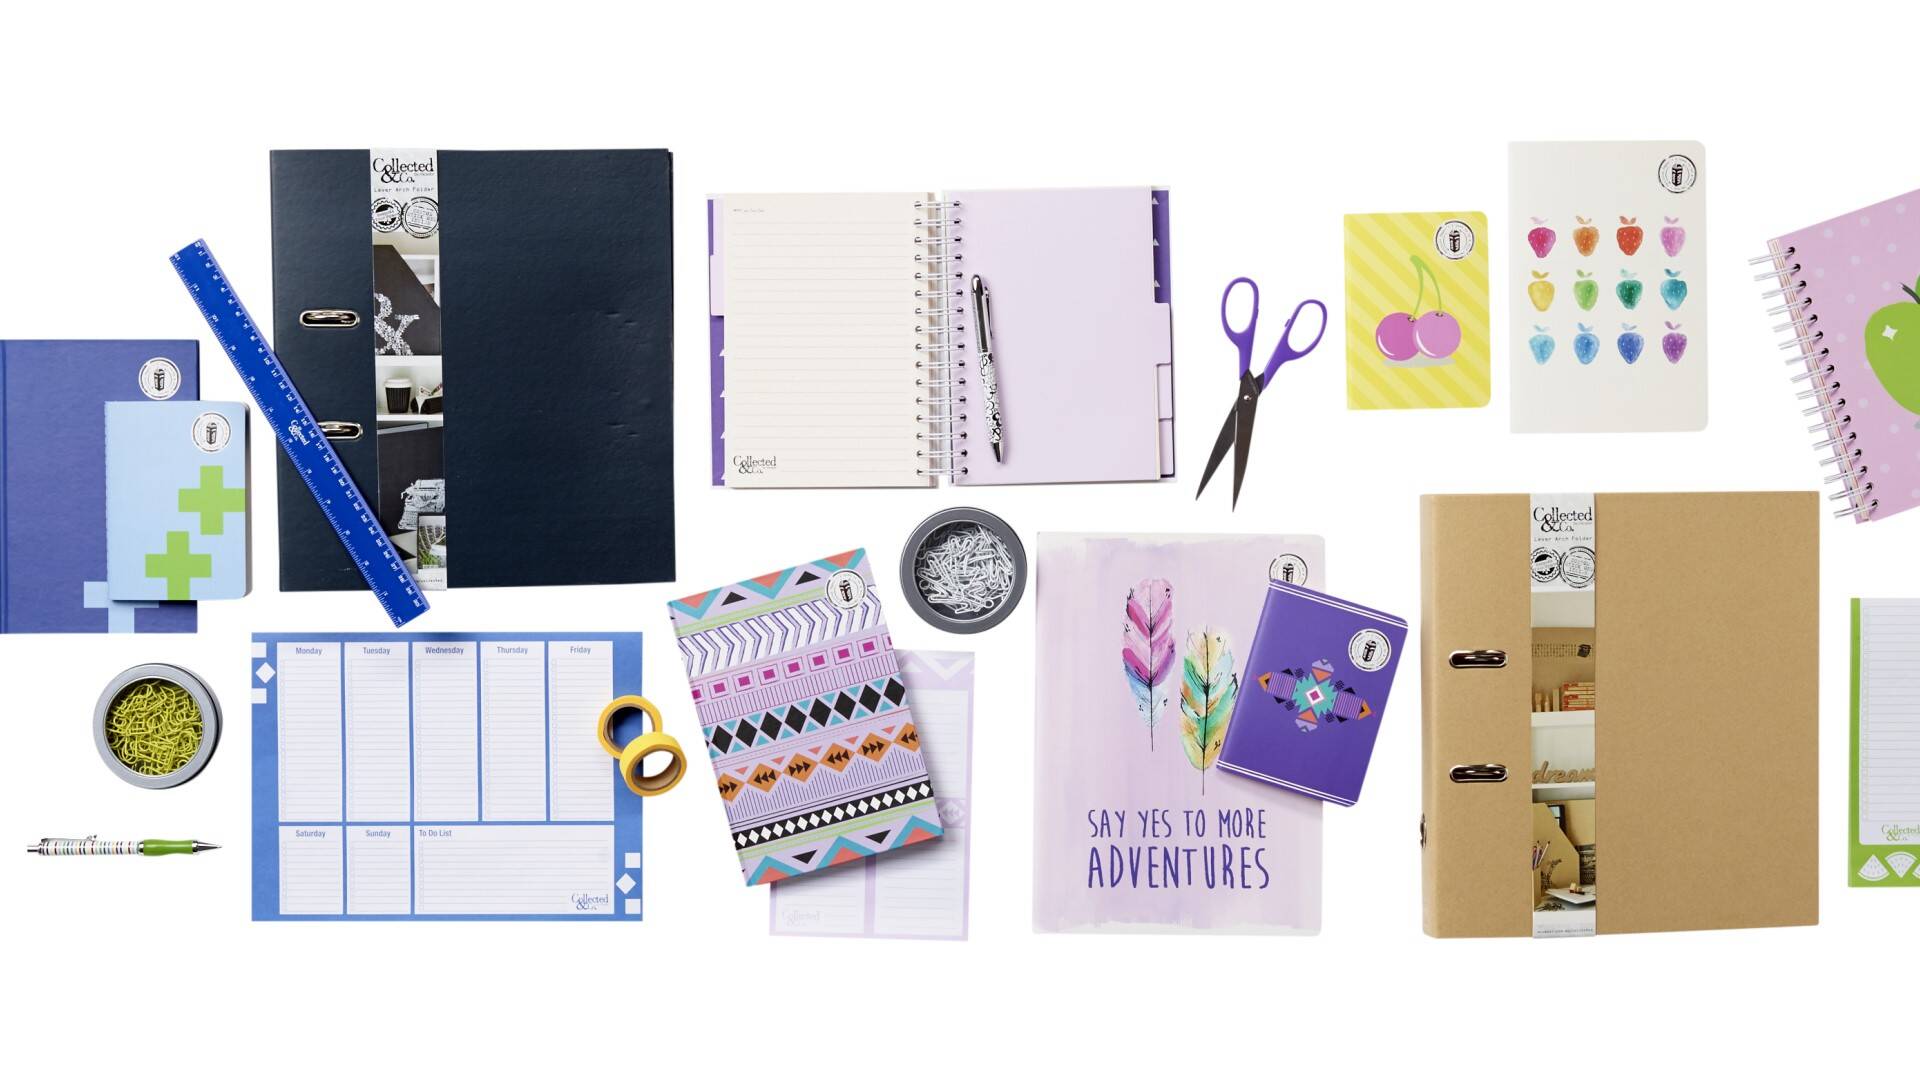 Have fun mixing and matching your notebooks, planners and stationery.